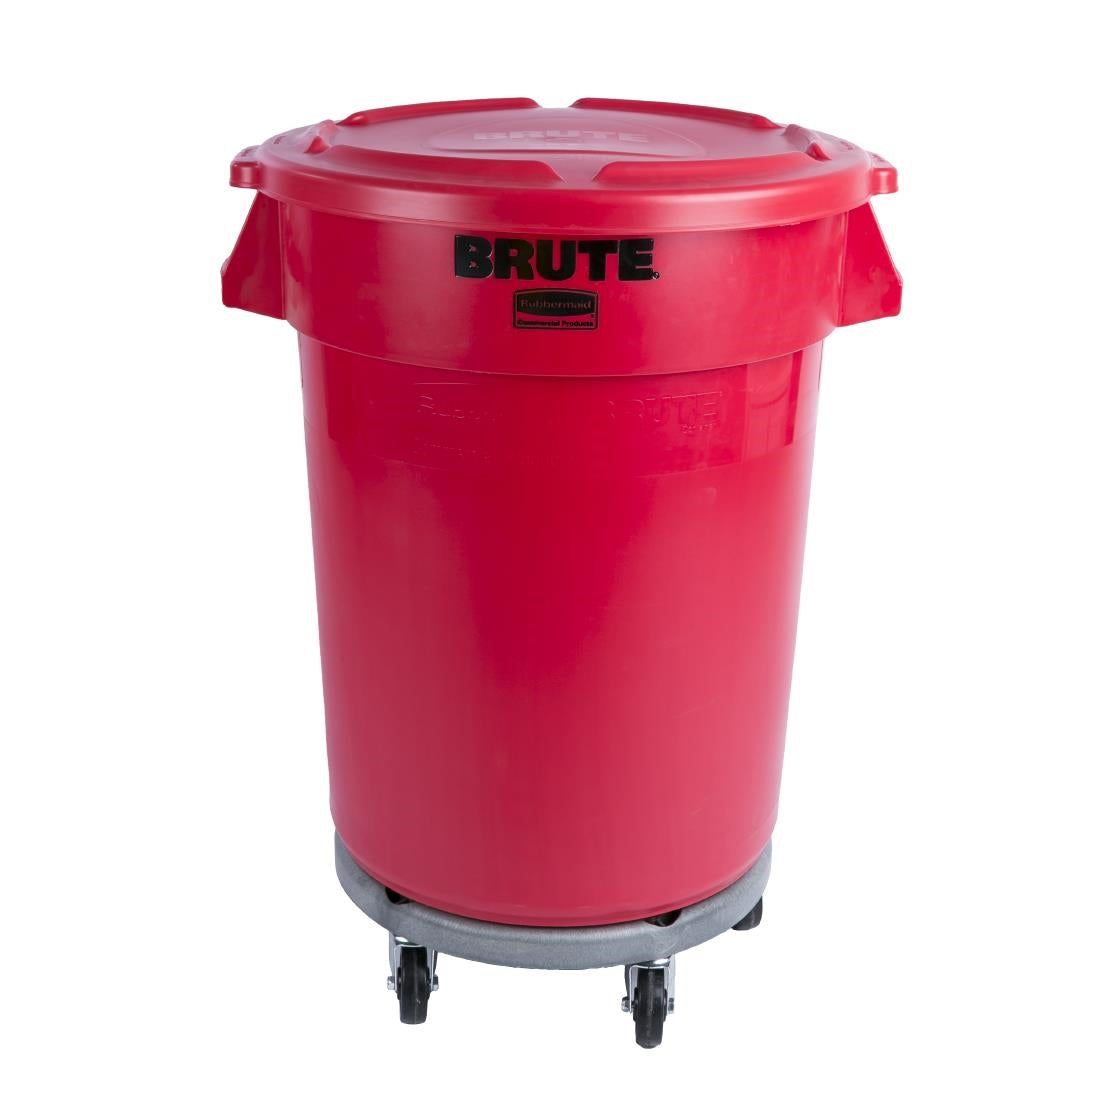 DN849 Rubbermaid Brute Utility Container Red 121Ltr